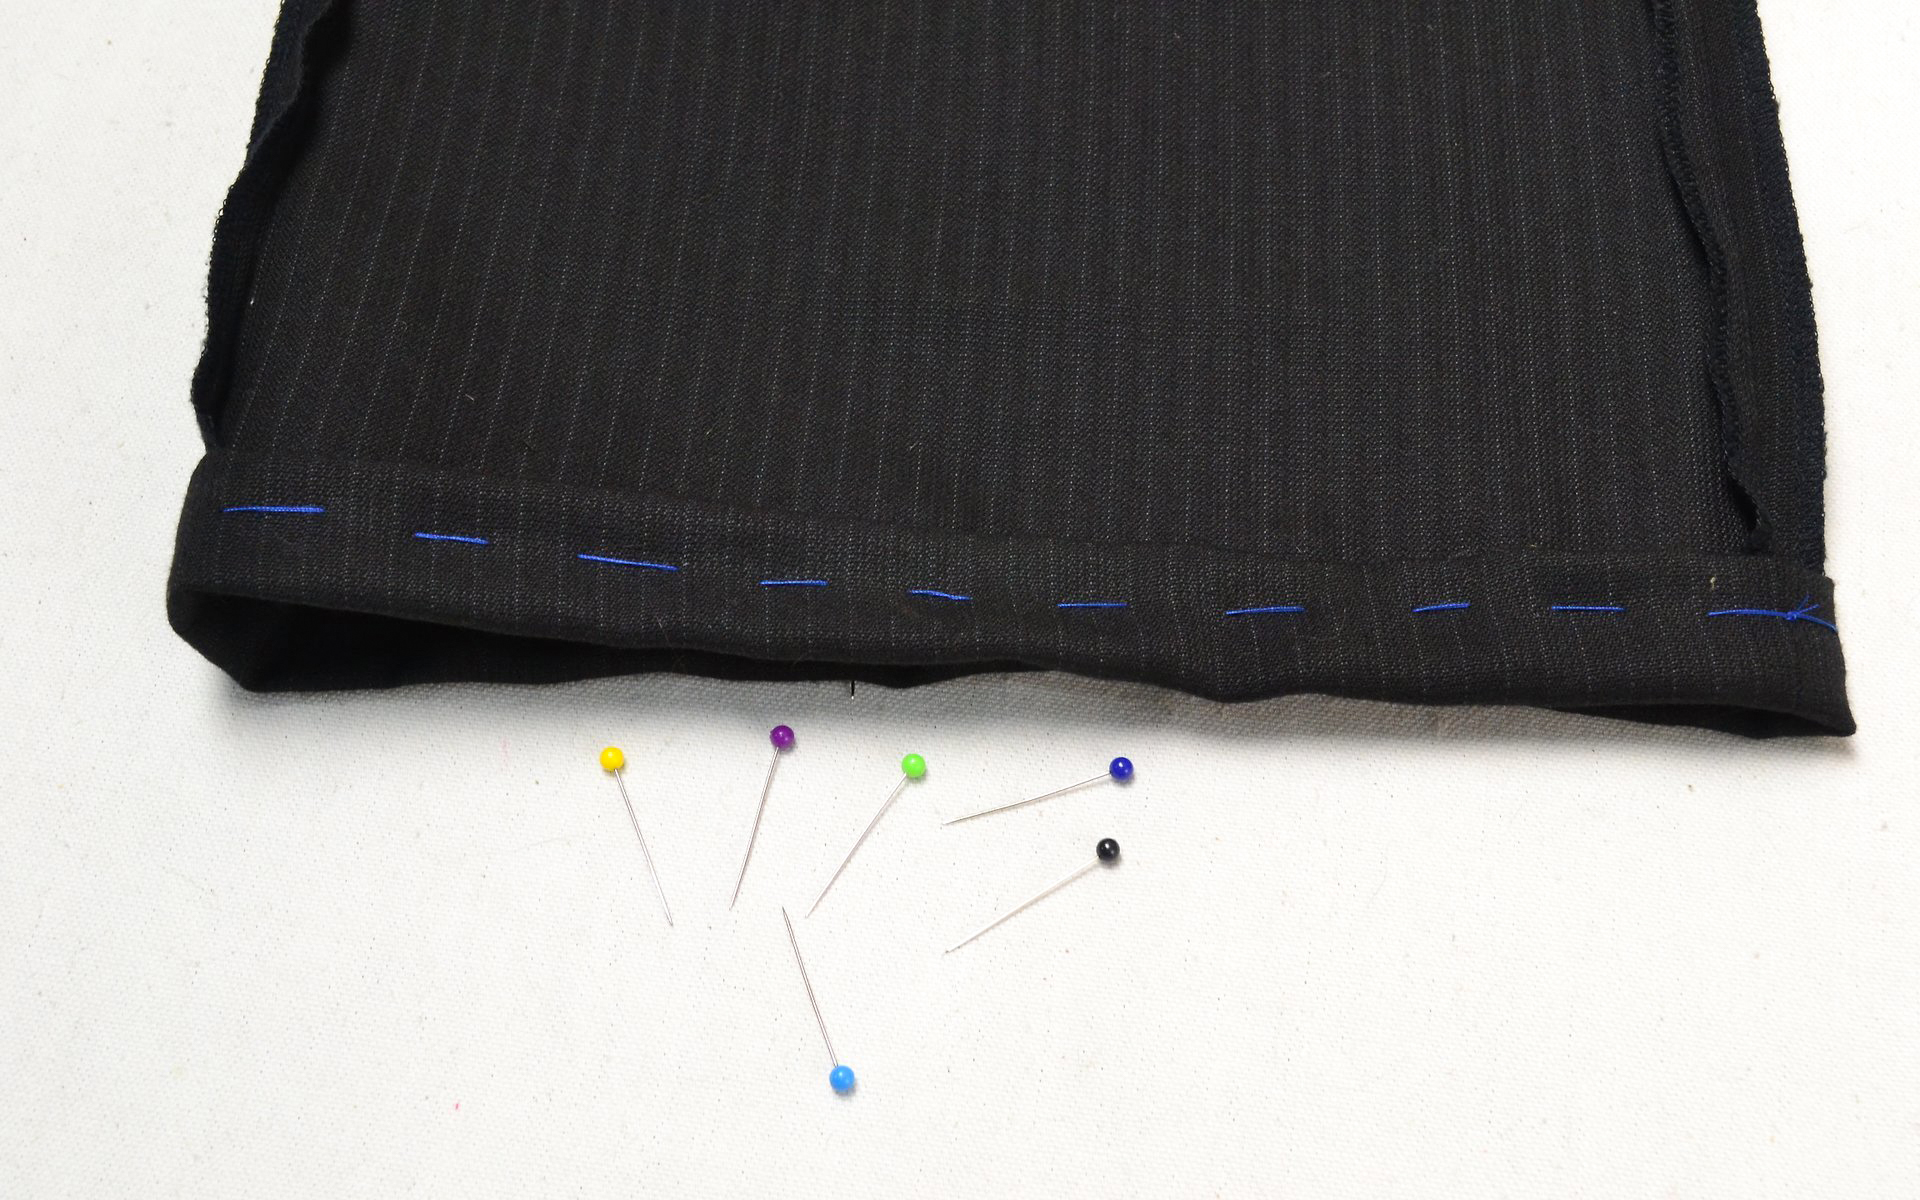 remove the straight pins when you finish sewing